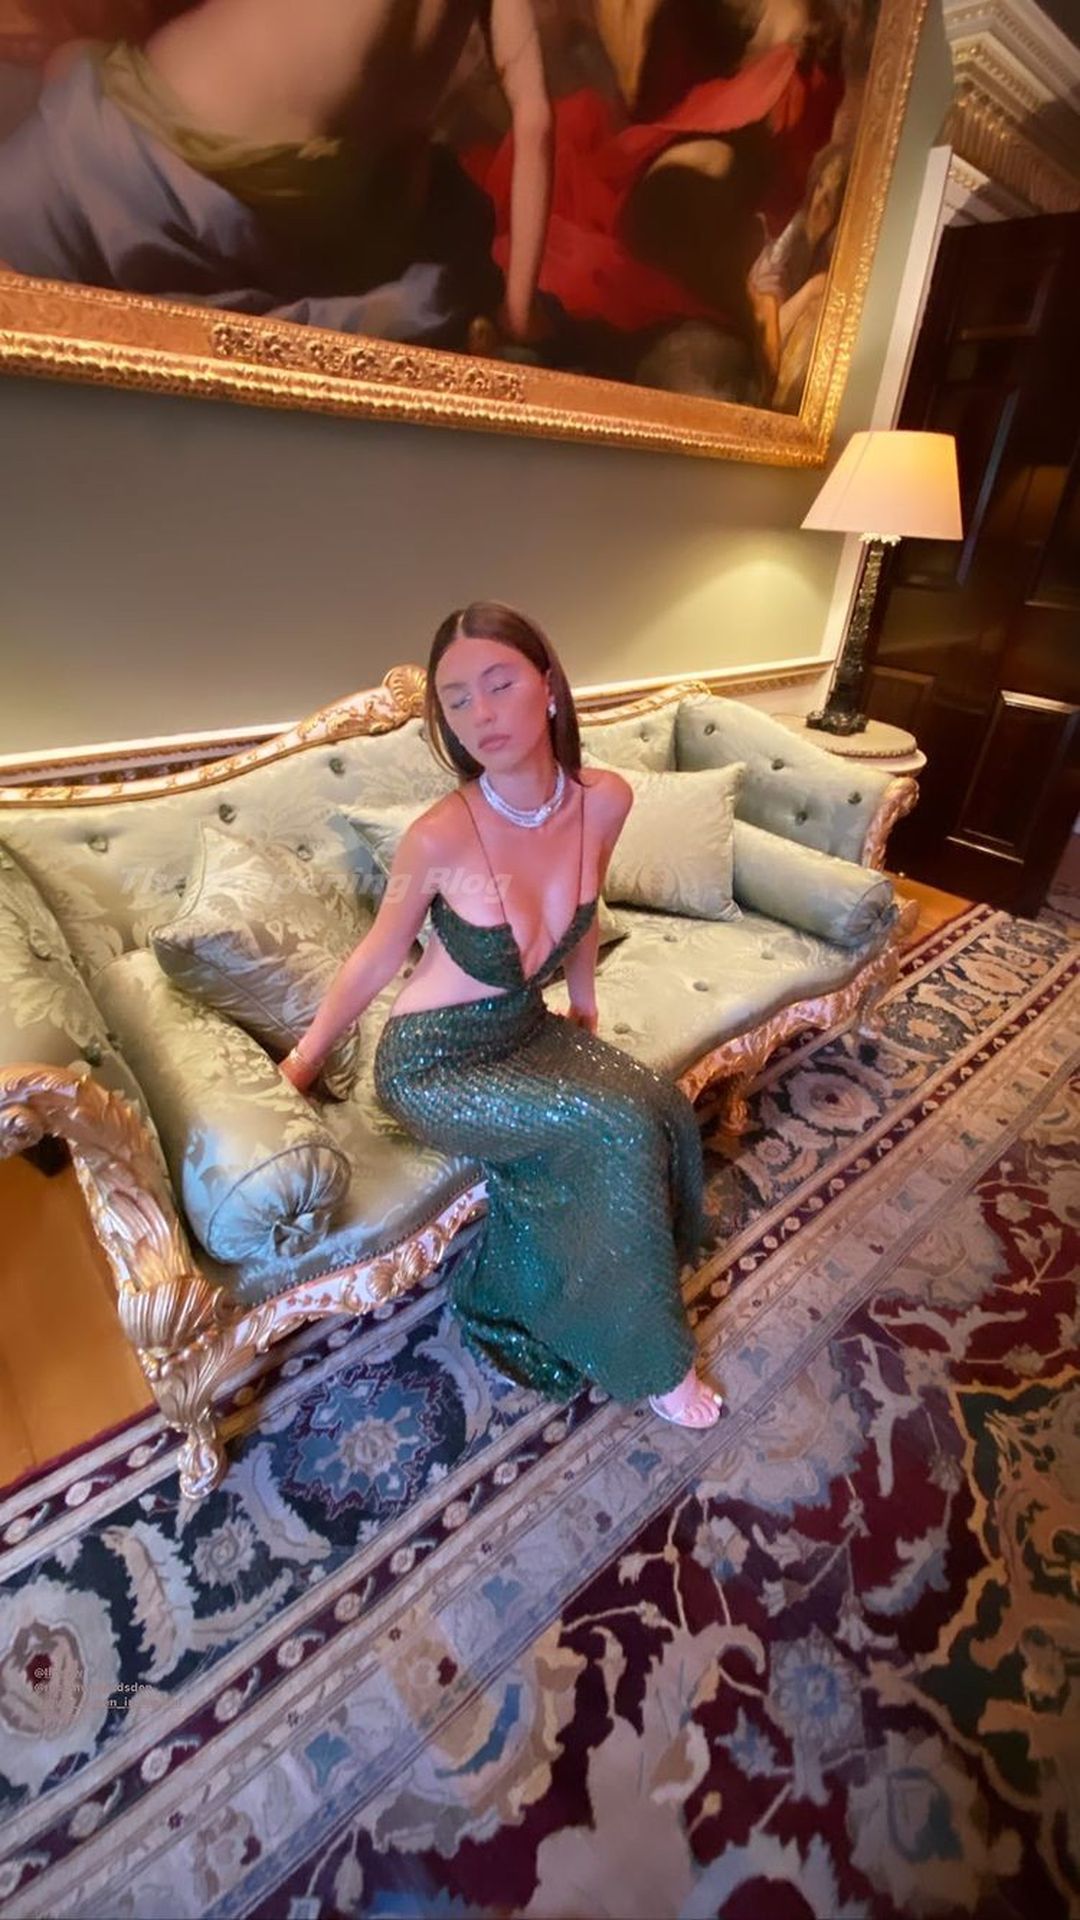 Iris Law Looks Hot in a Green Dress at Bvlgari Magnifica Gala Dinner (16 Photos + Video)